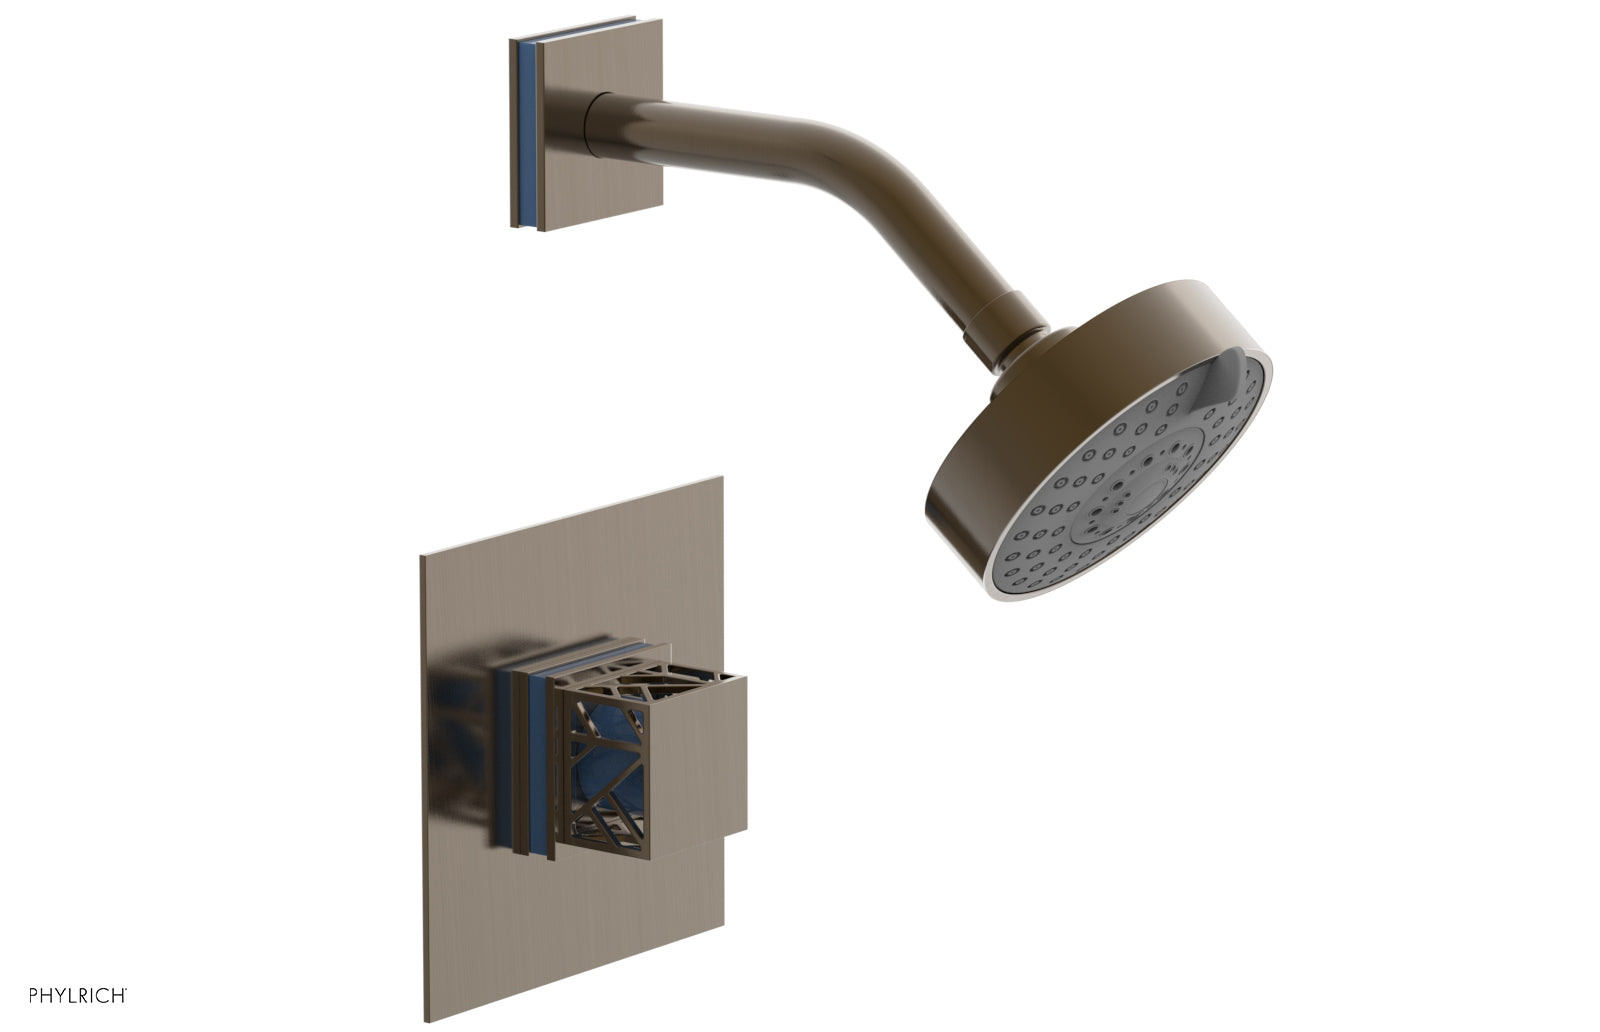 Phylrich JOLIE Pressure Balance Shower Set - Square Handle with "Light Blue" Accents